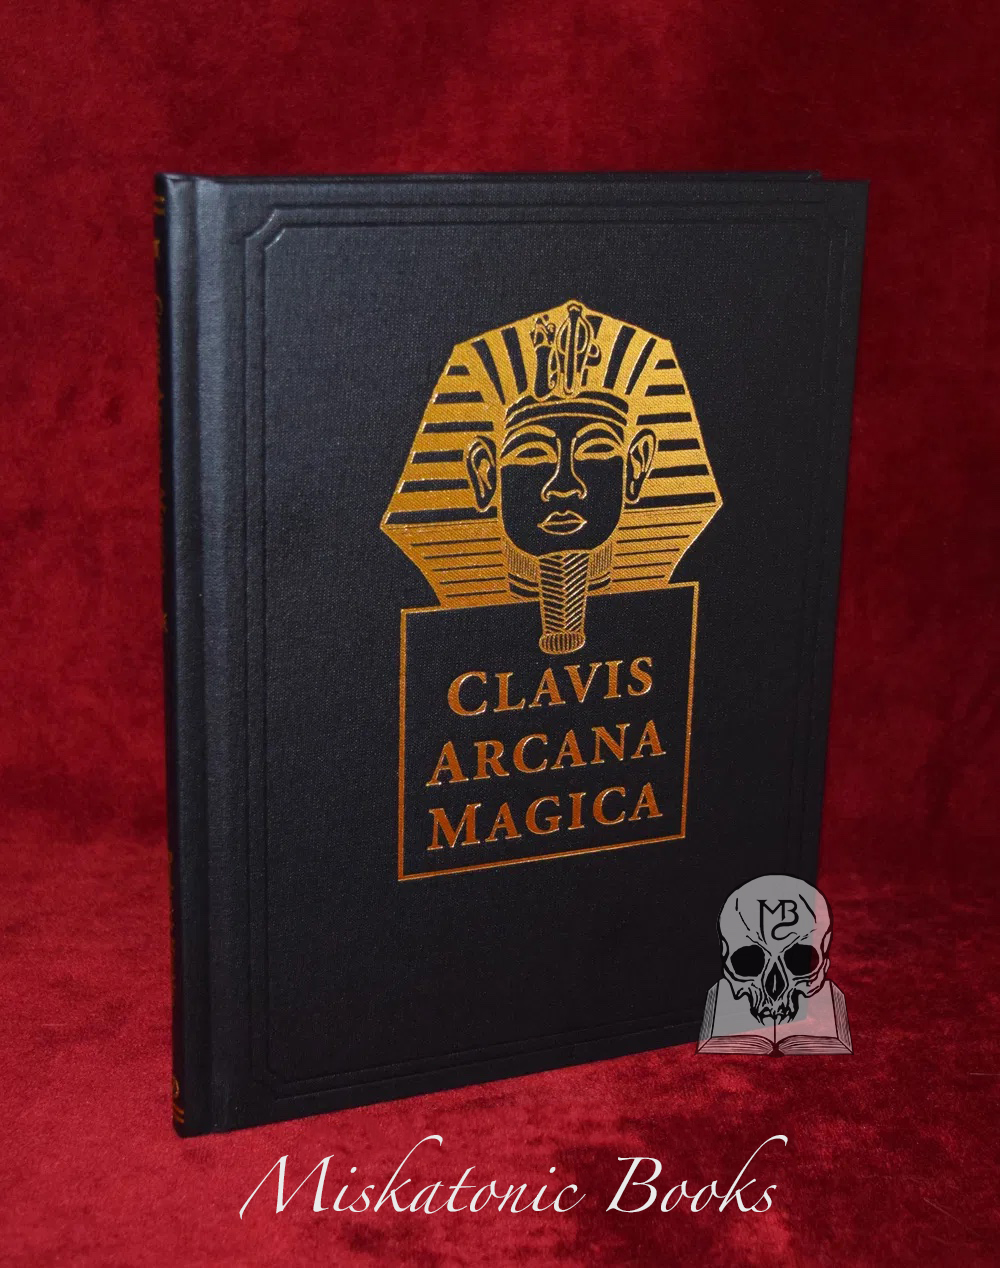 CLAVIS ARCANA MAGICA by Frederick Hockley, With an Introduction by Alan Thorogood (Limited Edition Hardcover)